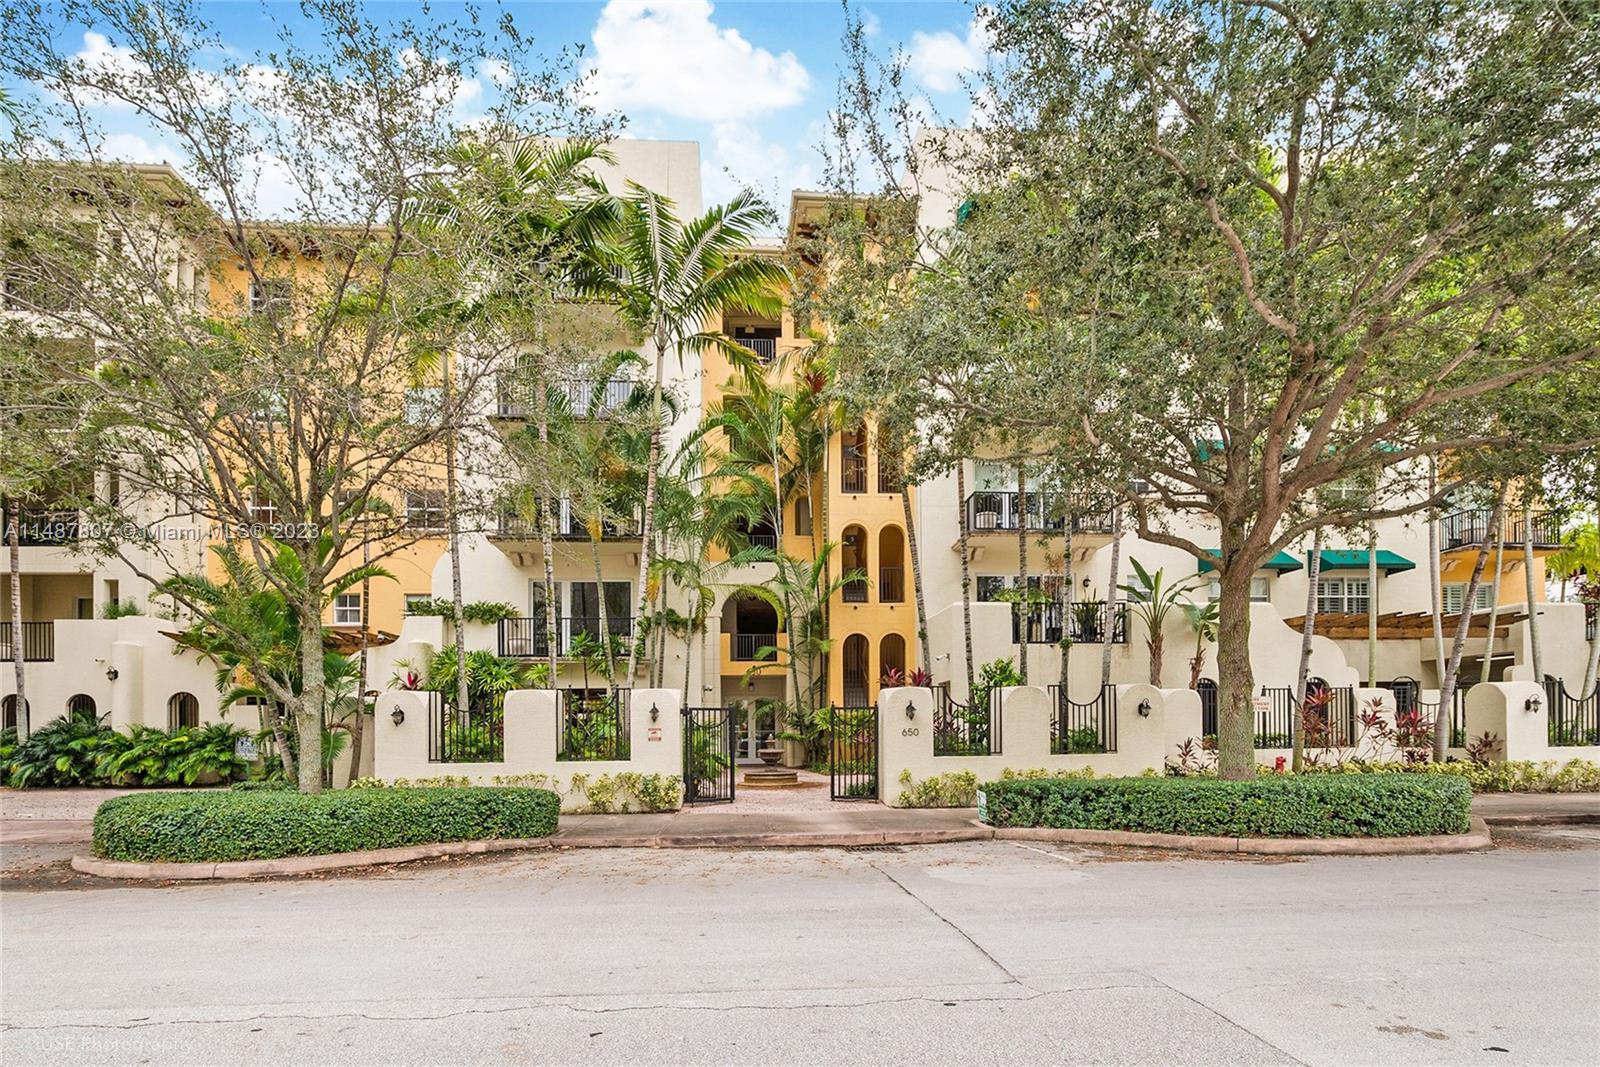 Beautiful 2-bedroom, 3 bathrooms PLUS DEN/OFFICE residence in a secure boutique building in the heart of Coral Gables. This 1,932 sf. unit boasts all in-suite bedrooms, marble floors throughout, high ceilings, laundry room/utility, impact resistant windows and doors, spacious kitchen with SS appliances including wall oven and wine cooler. Large master suite w/ walk-in closet, bathroom with dual sink/vanities, tub, separate shower, and a private terrace. Other features include elevator access to private foyer, additional balcony in living room and 2 covered assigned parking spaces. Excellent location steps away of Granada Golf Course, Miracle Mile, cafes, restaurants, and all amenities Coral Gables offers. Easy to show. A MUST SEE!!!